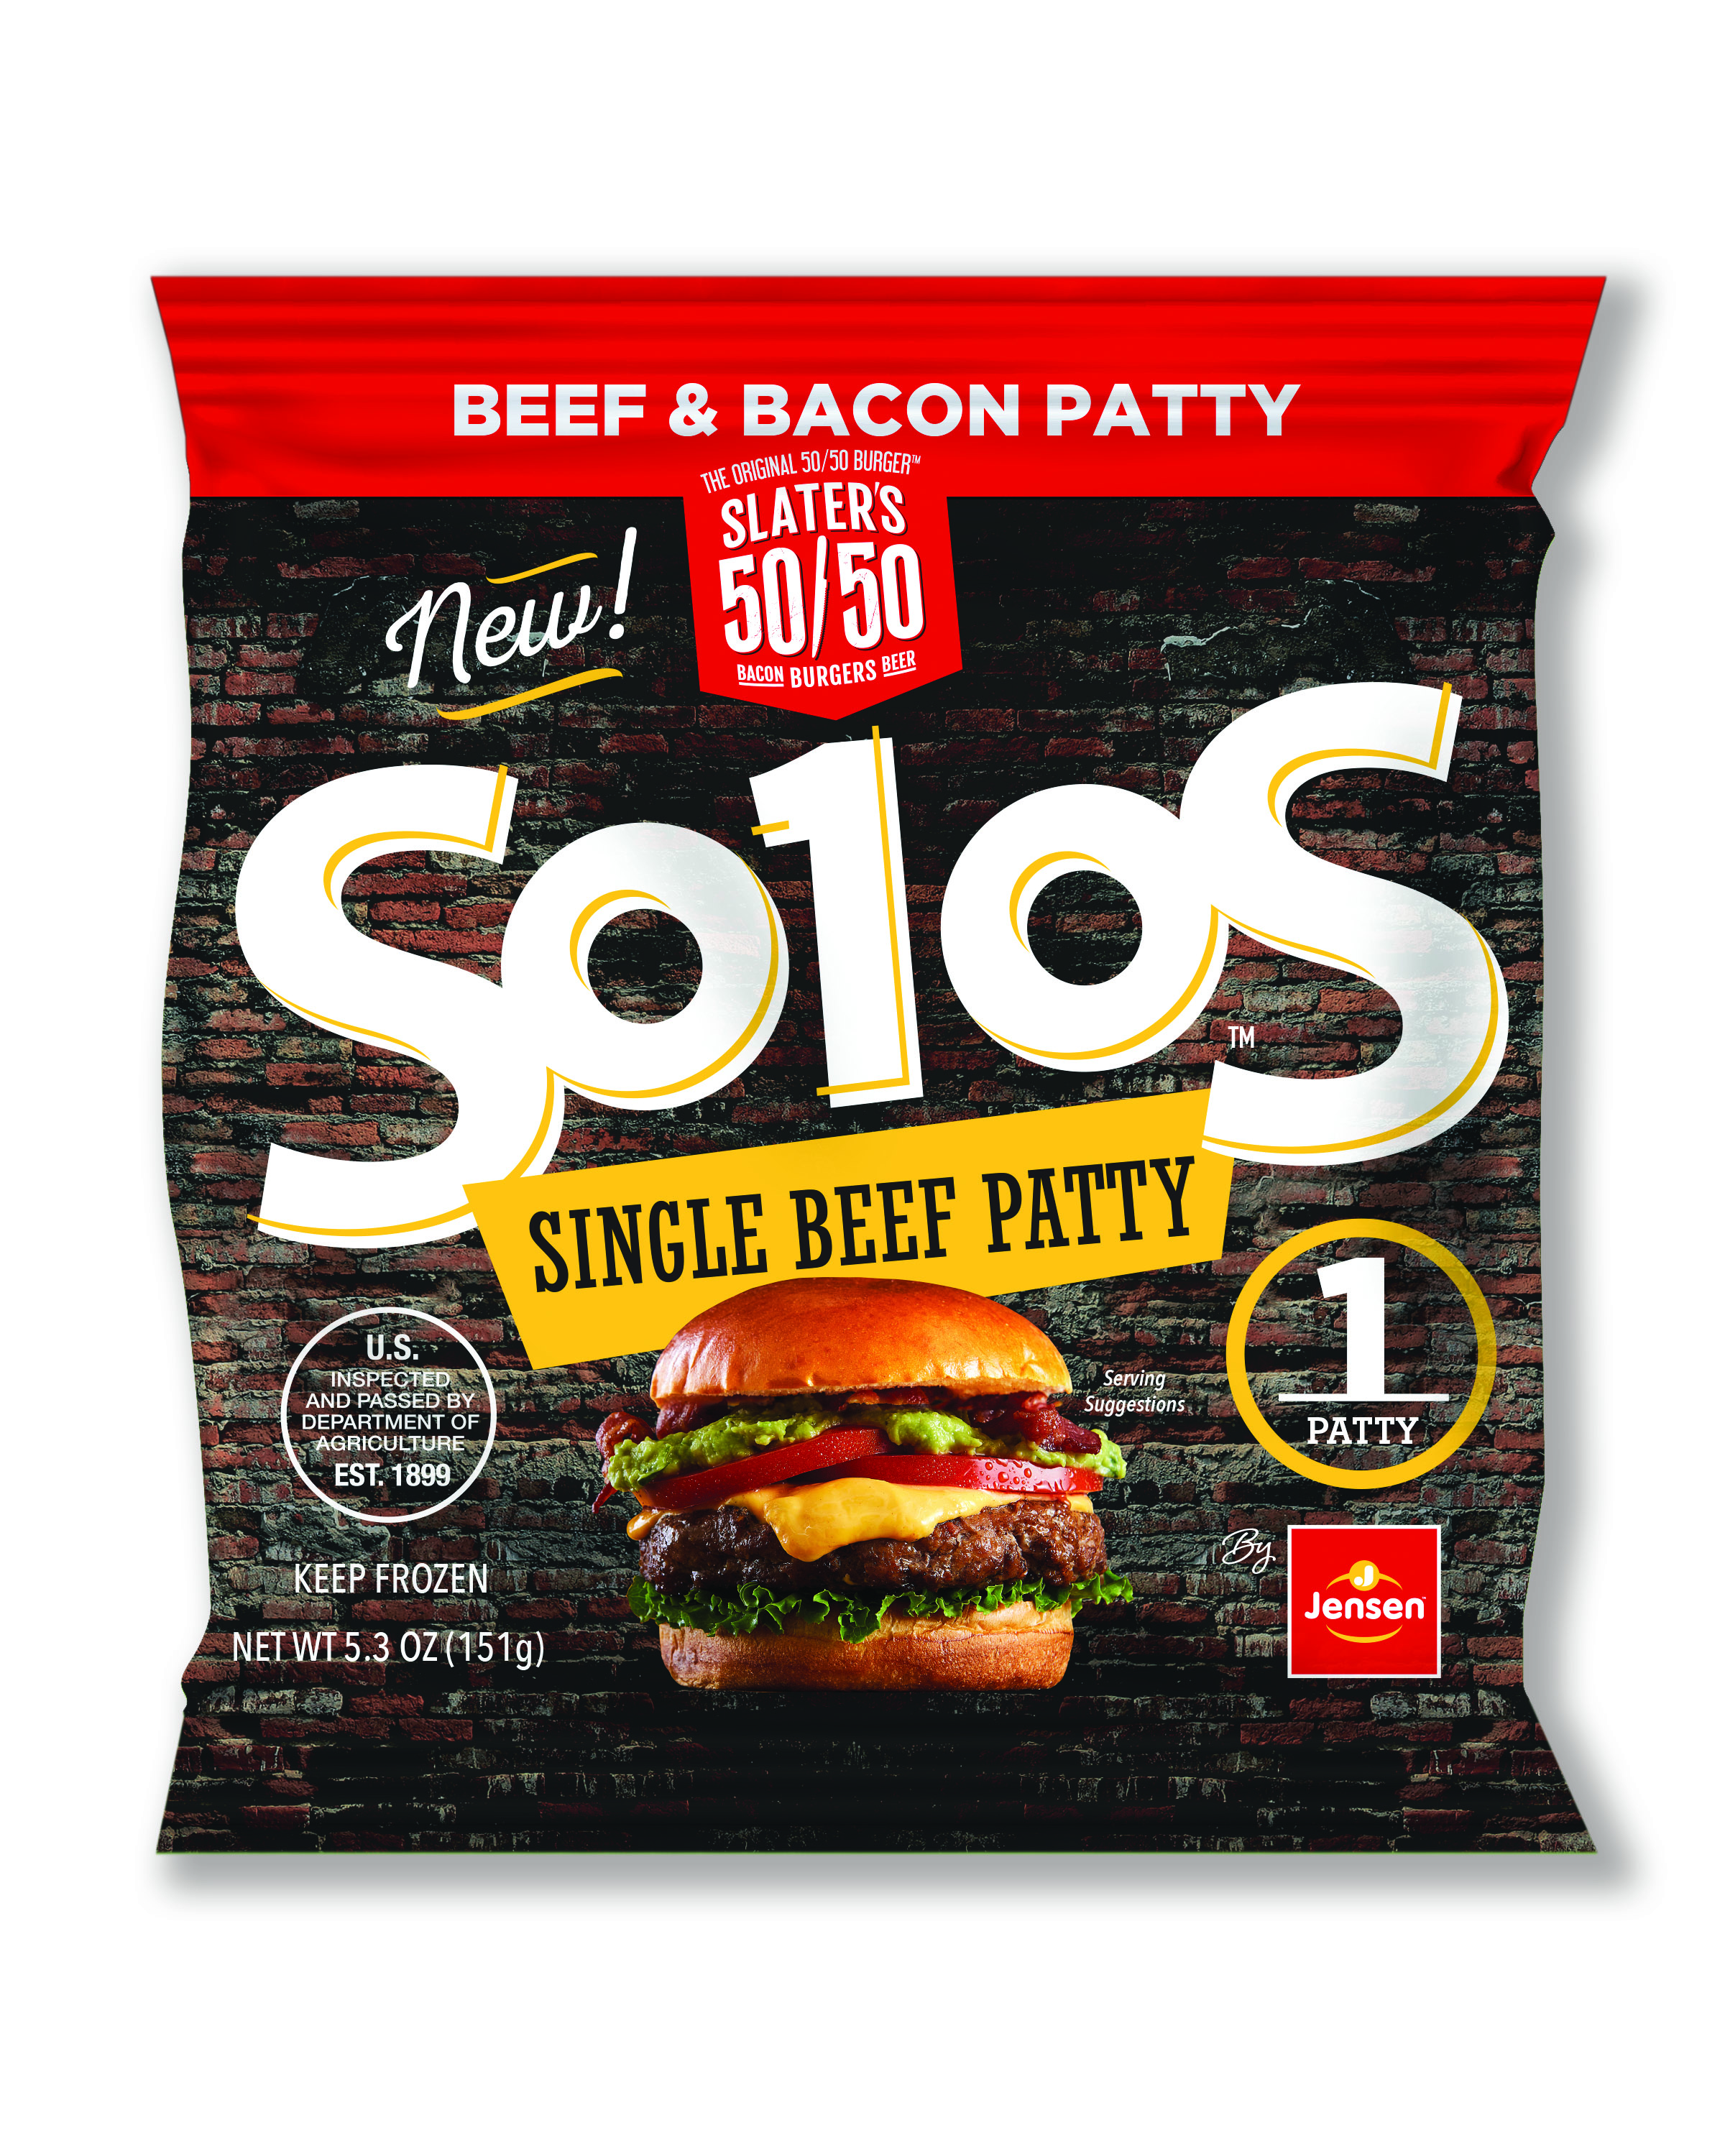 Beef & Bacon – Famous award-winning 50% ground bacon and 50% ground beef burger from Slater's 50/50® Restaurants